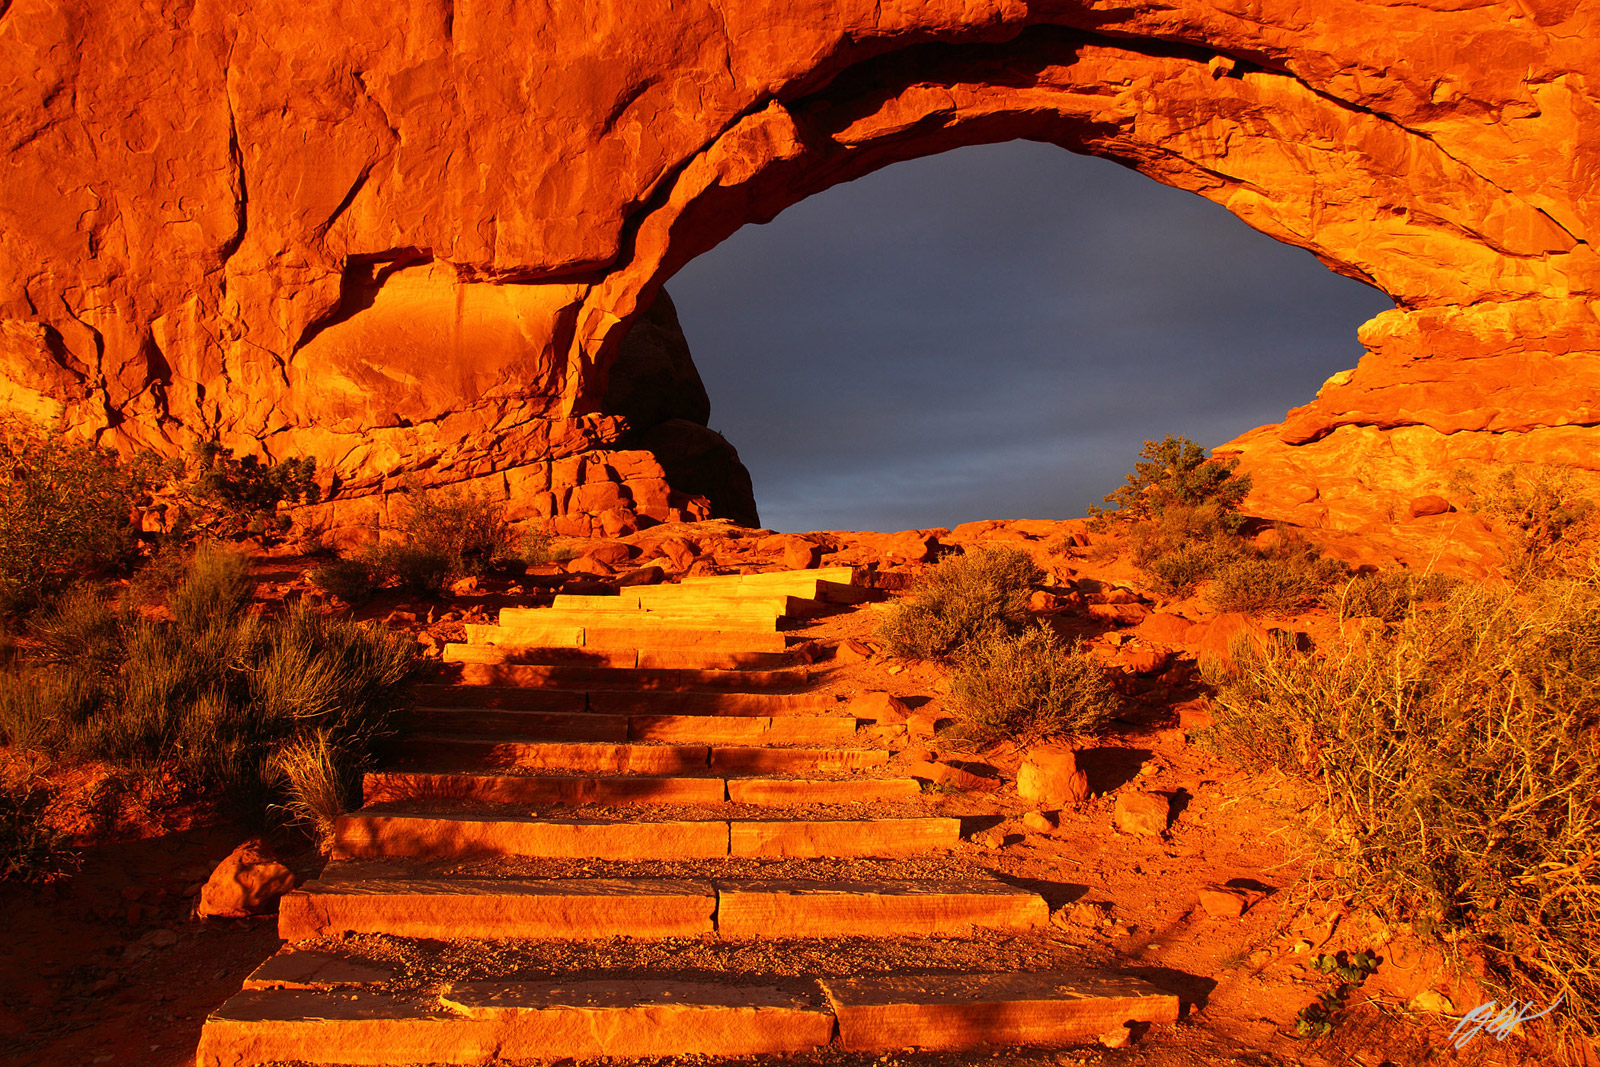 Evening Light on the North Window from Arches National Park in Utah